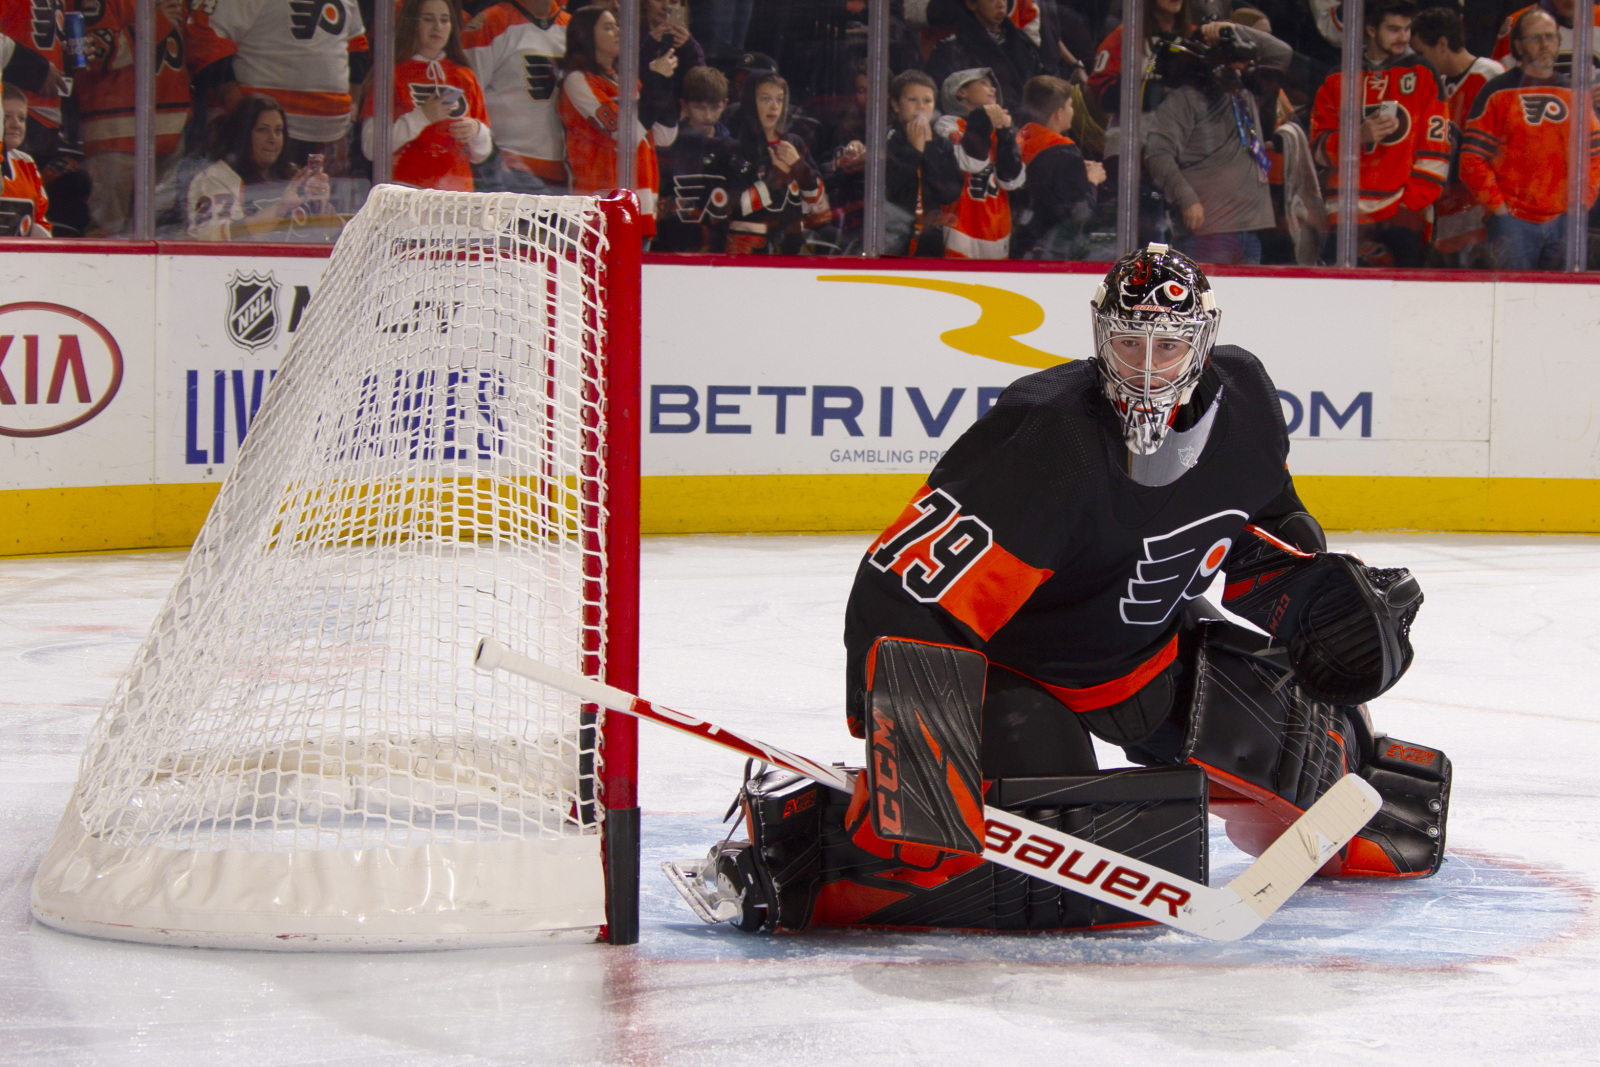 Carter Has Been The Hart of the Flyers